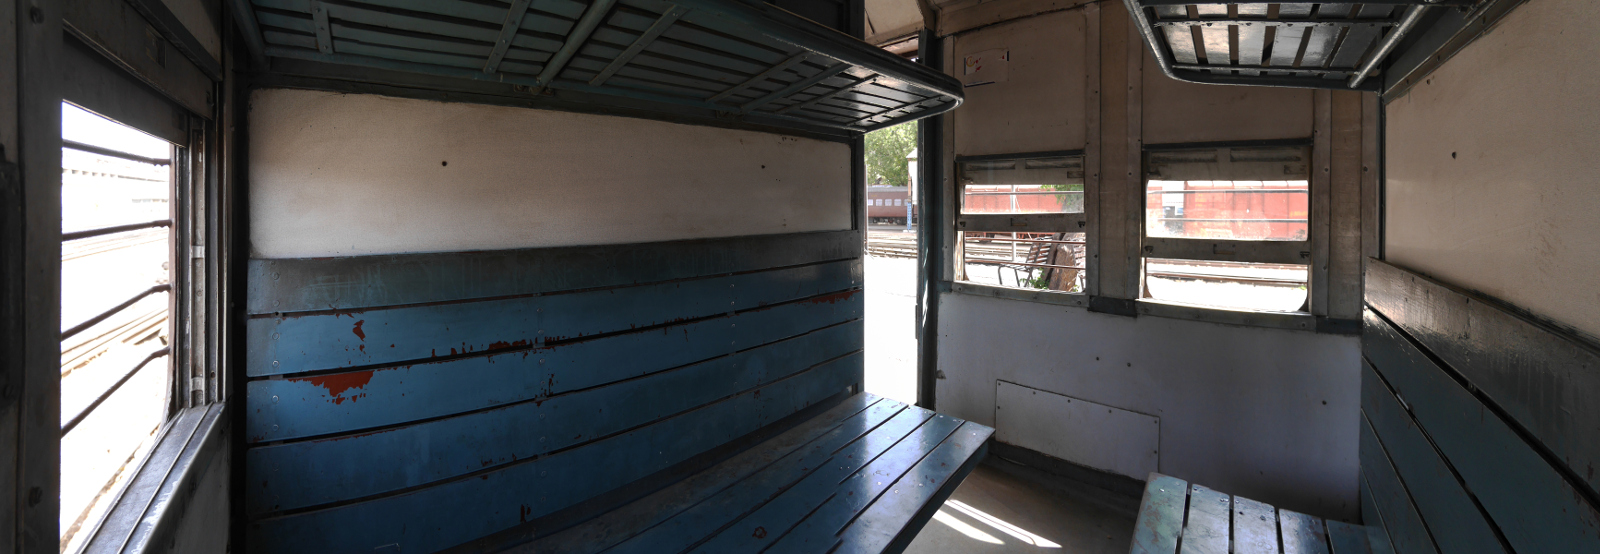 Panorama of a compartment in a meter-gauge train.